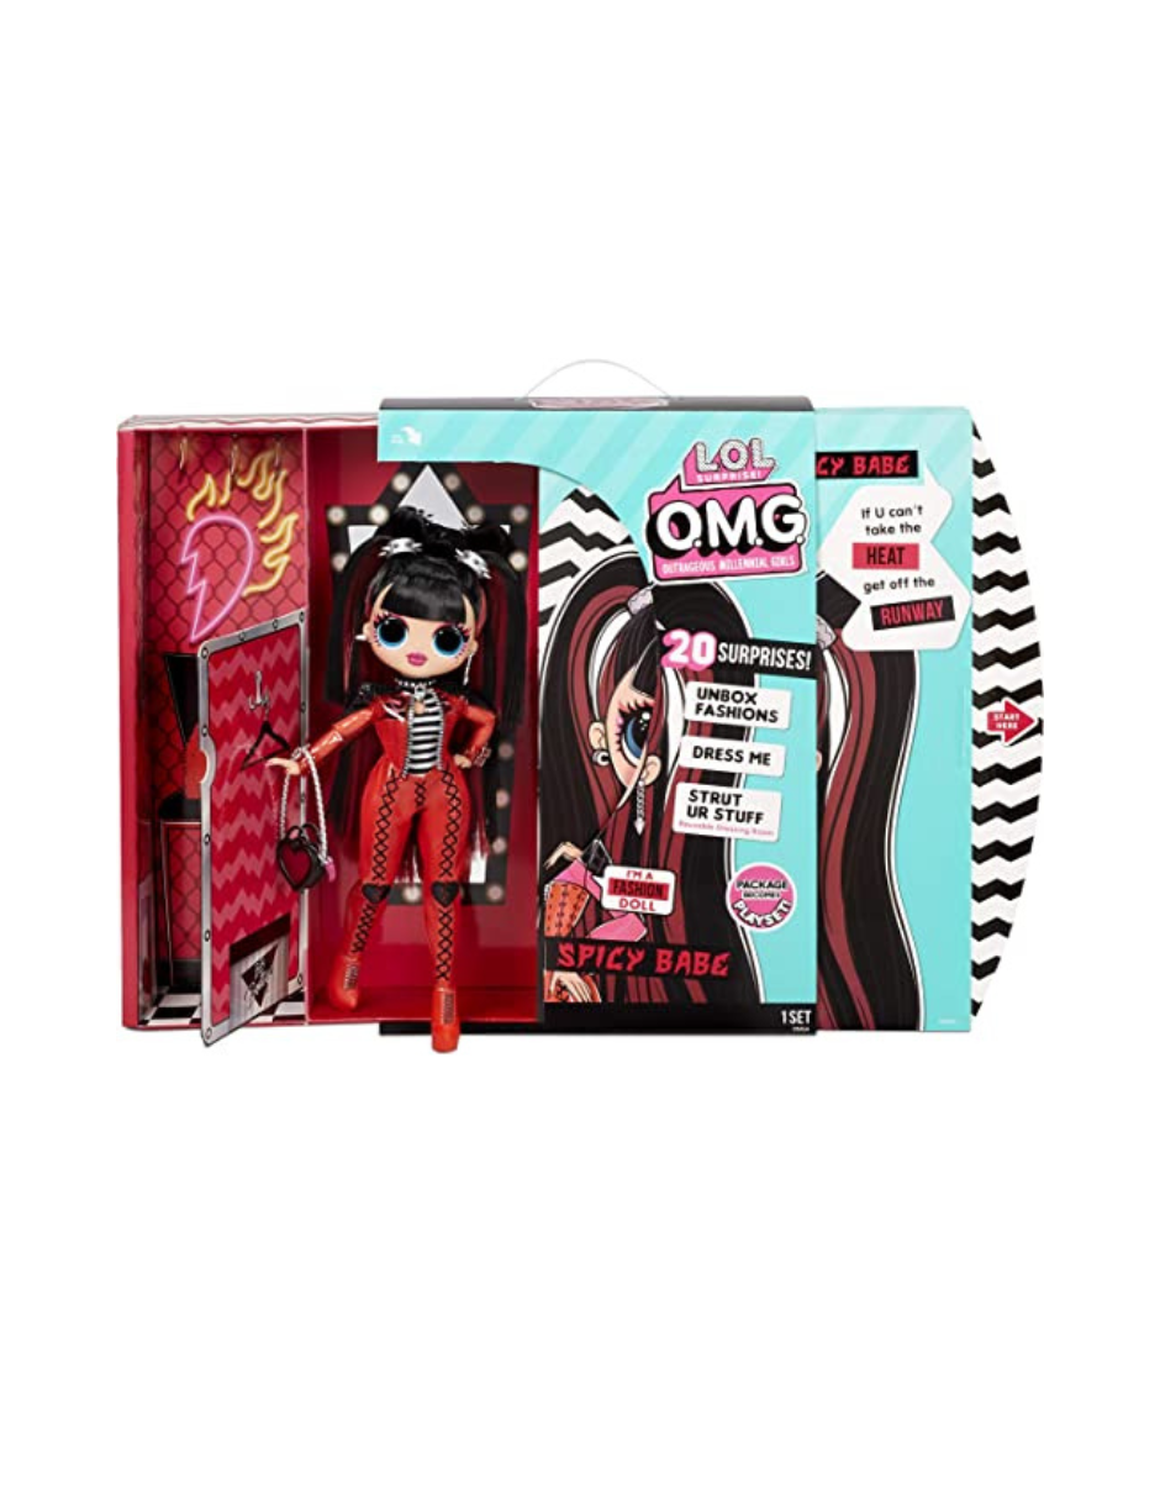 L.O.L. Surprise! O.M.G. Serie 4 Spicy Babe